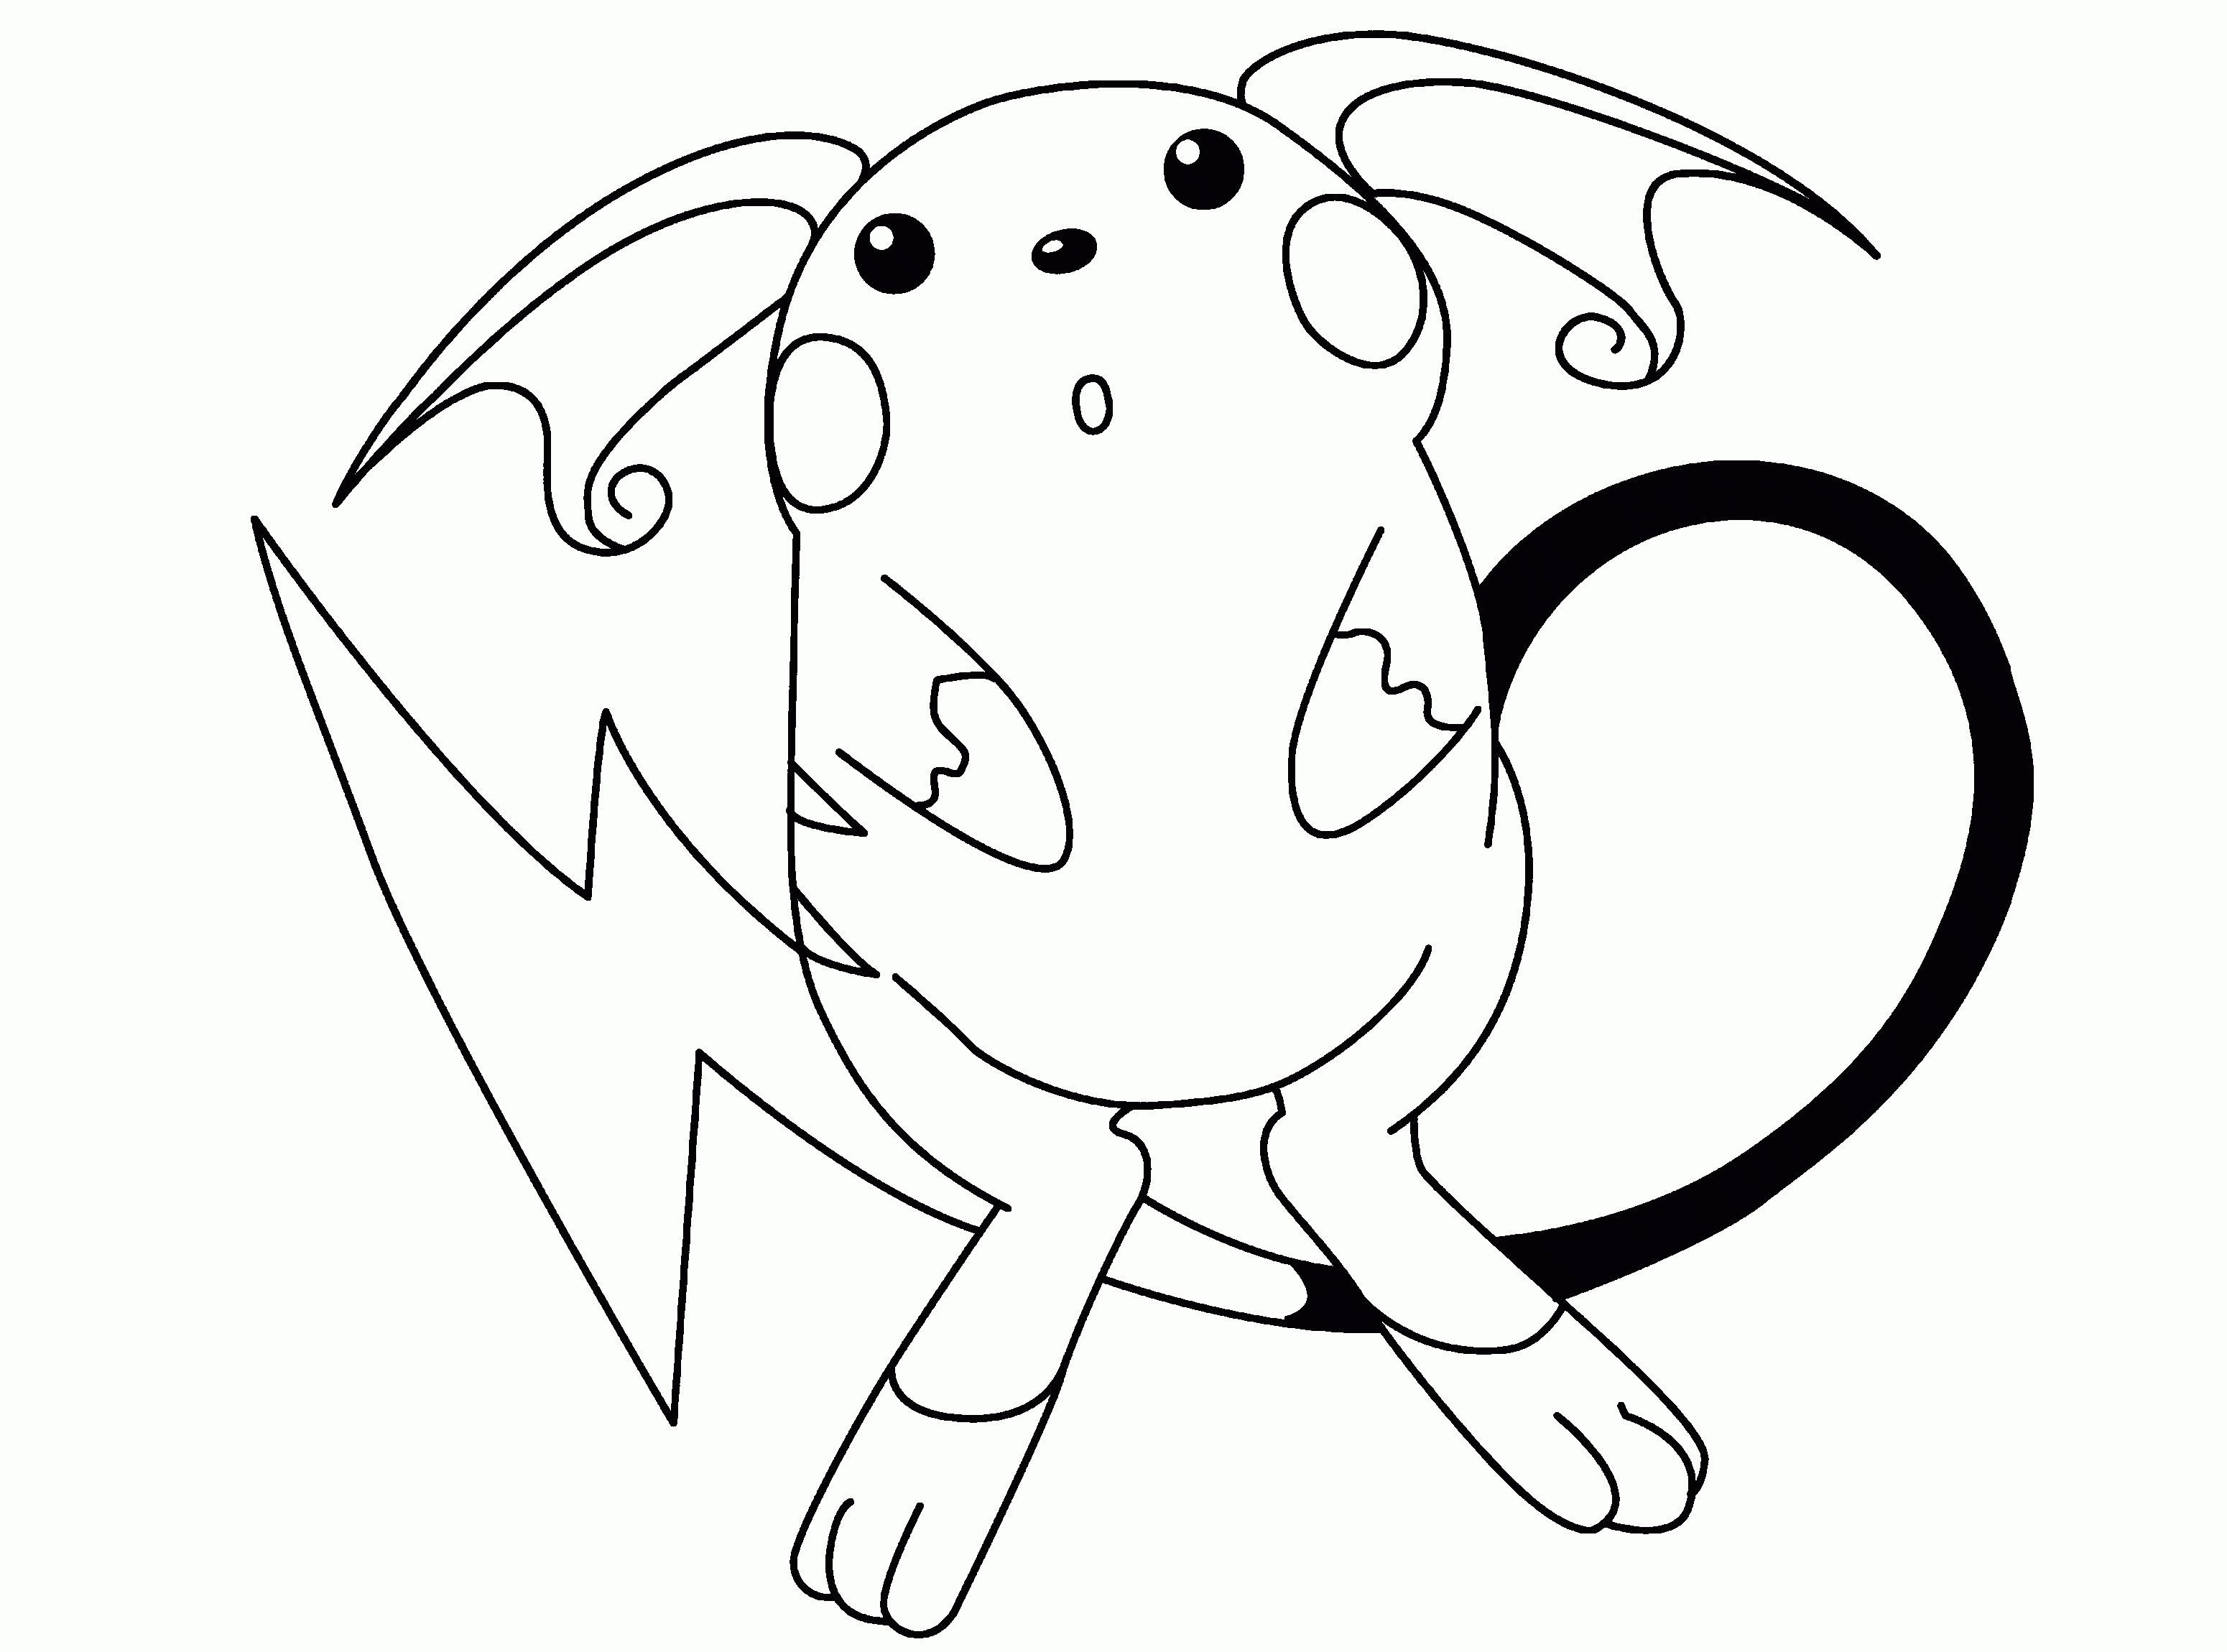 Free Printable Pokemon Coloring Pages Fresh Coloriage Amphinobi Ðÿñ - Free Printable Pokemon Coloring Pages